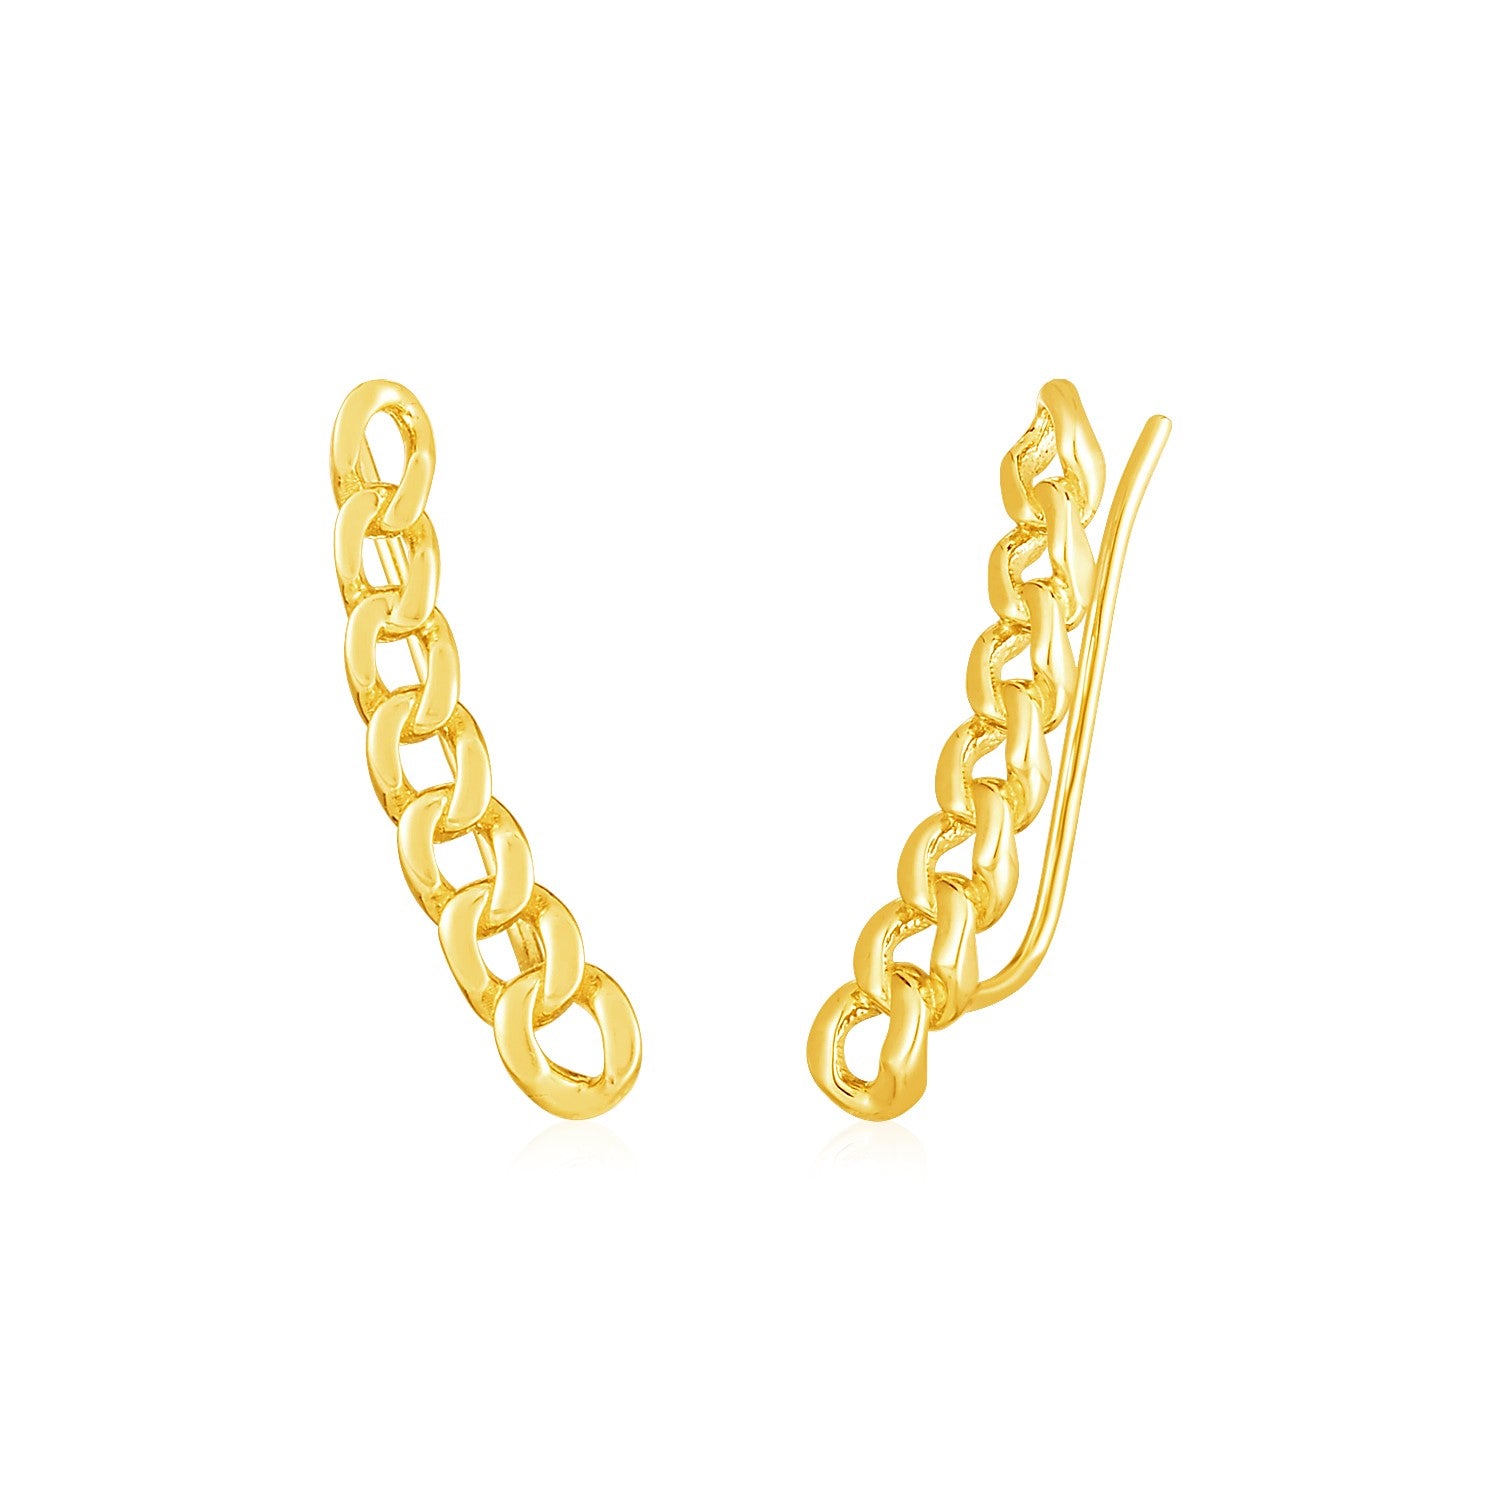 14k Yellow Gold Ear Climber Earring with Chain Links